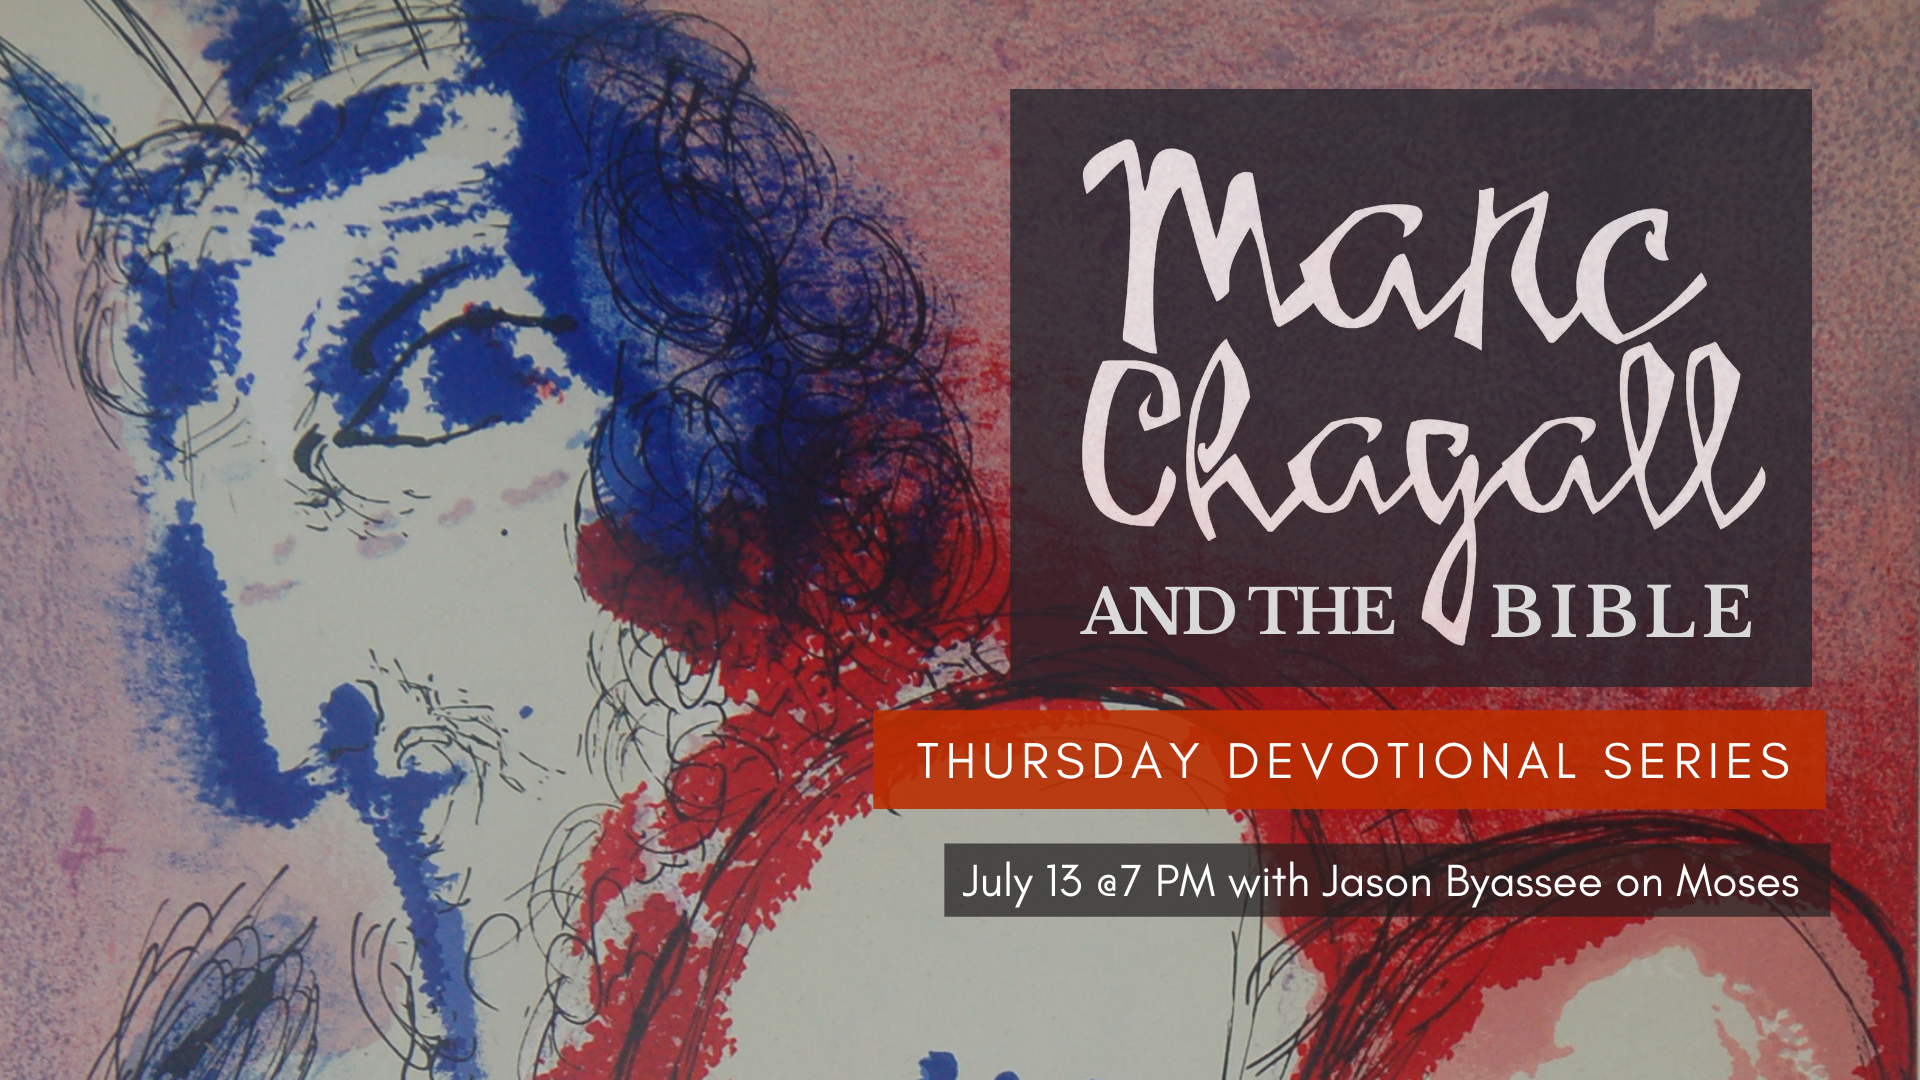 Marc Chagall and the Bible devotional series with Jason Byassee on July 13, 2023